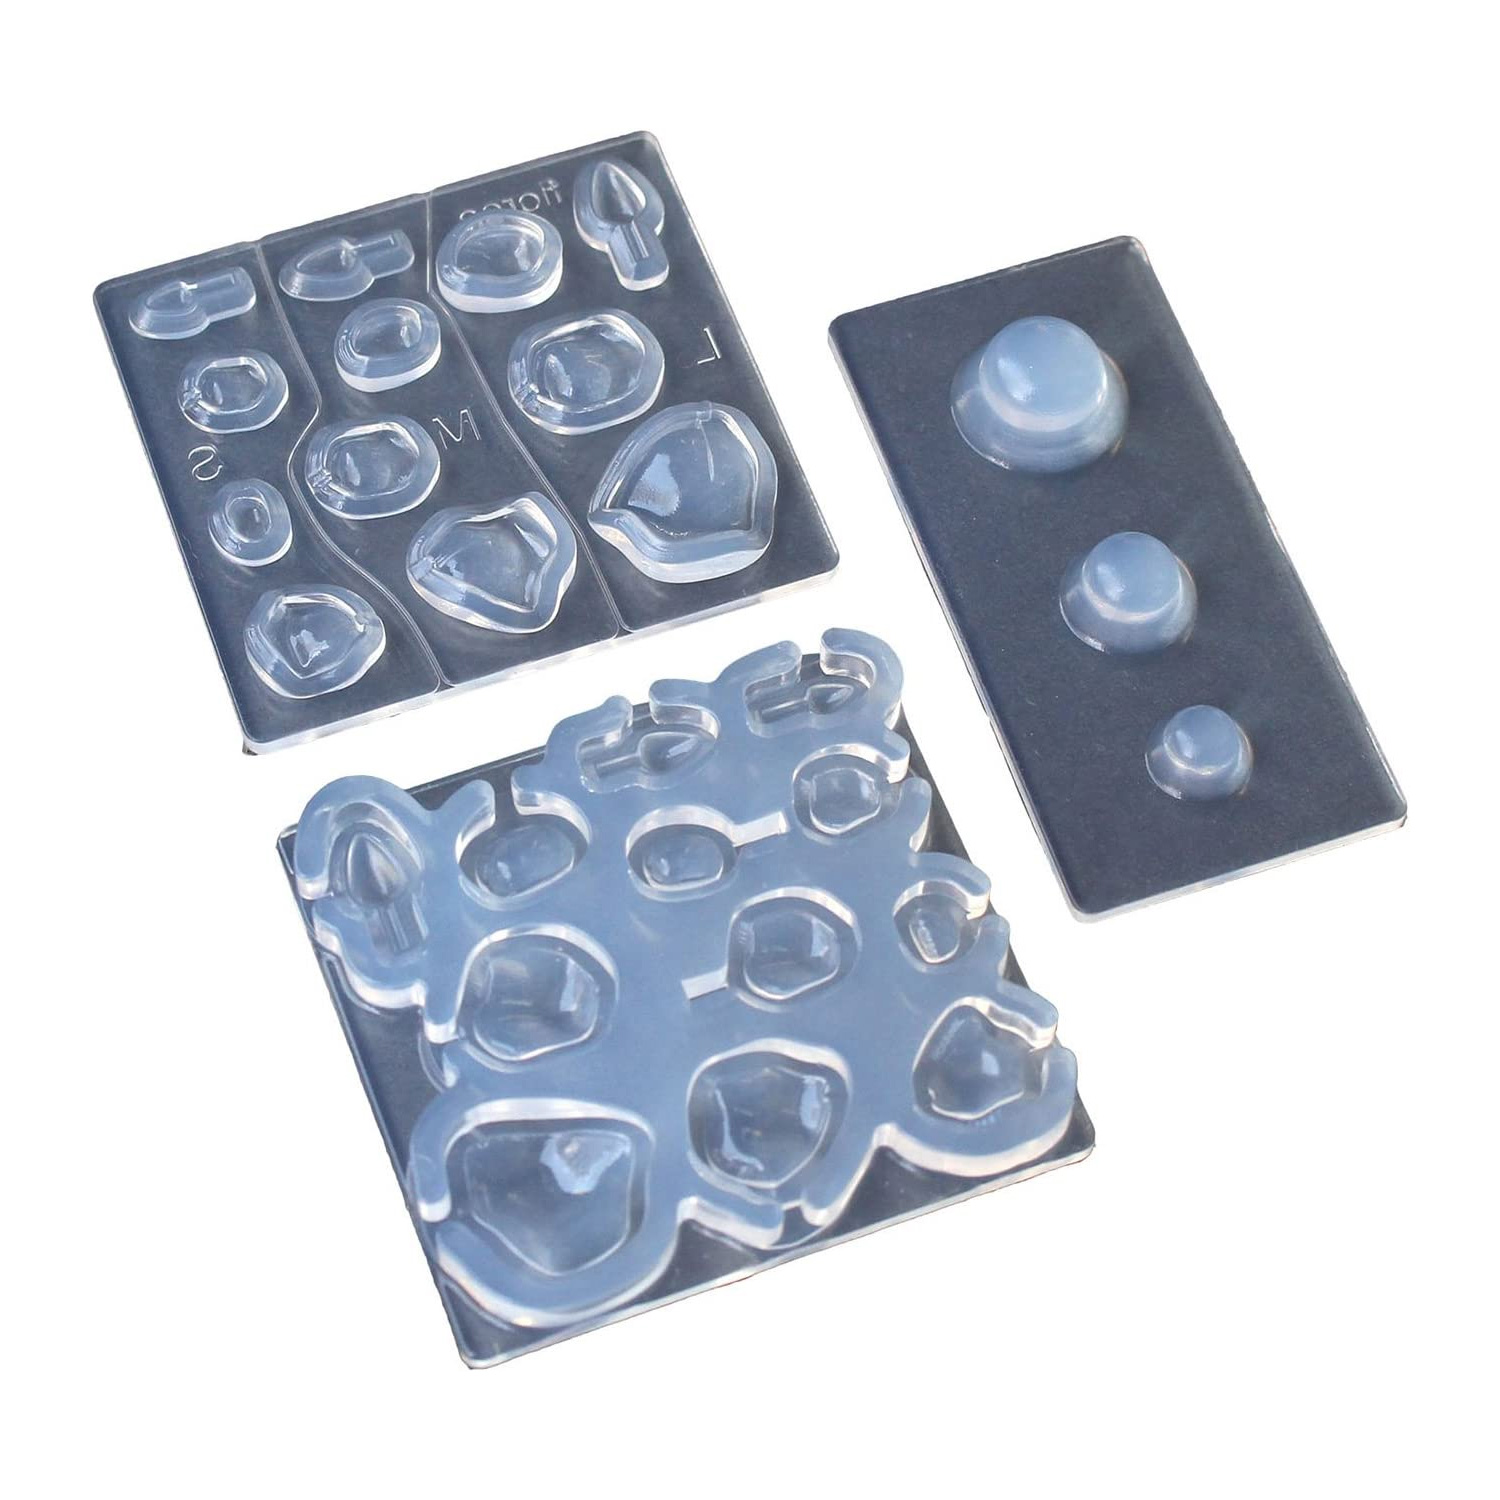 KAM-REJ-650  Resin Crafting Silicone Mold  (pcs)